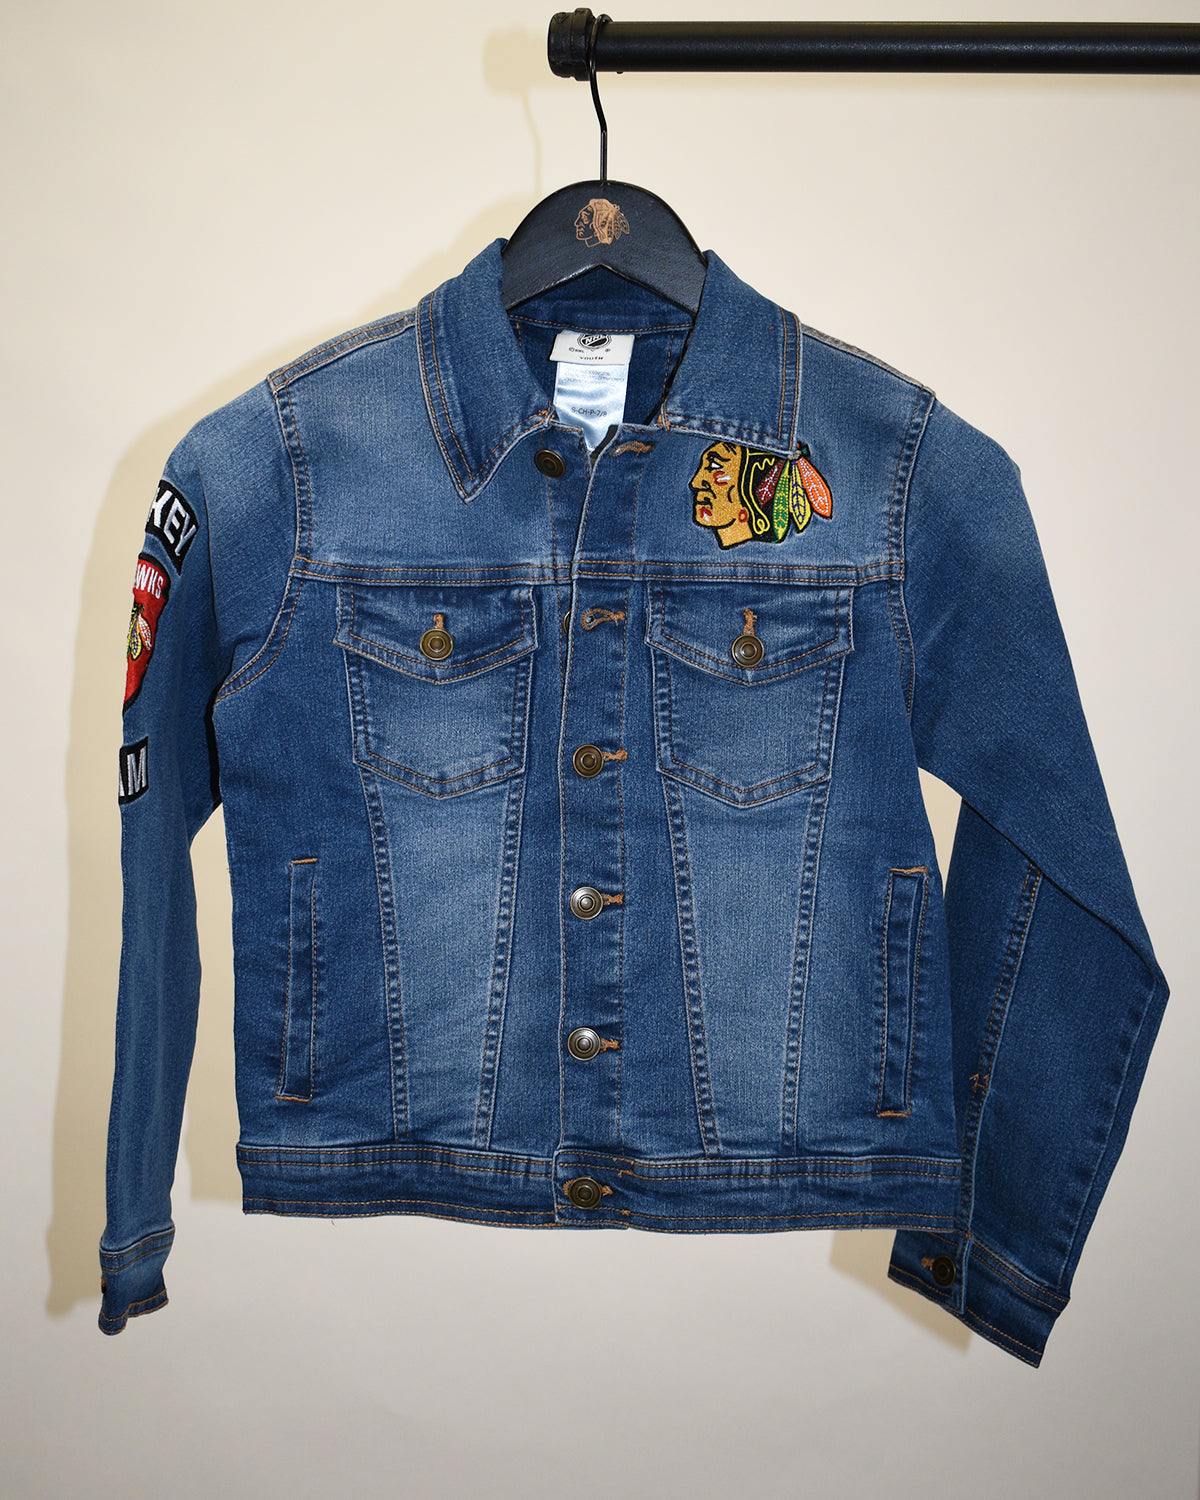 Girls Denim Jacket With Patches